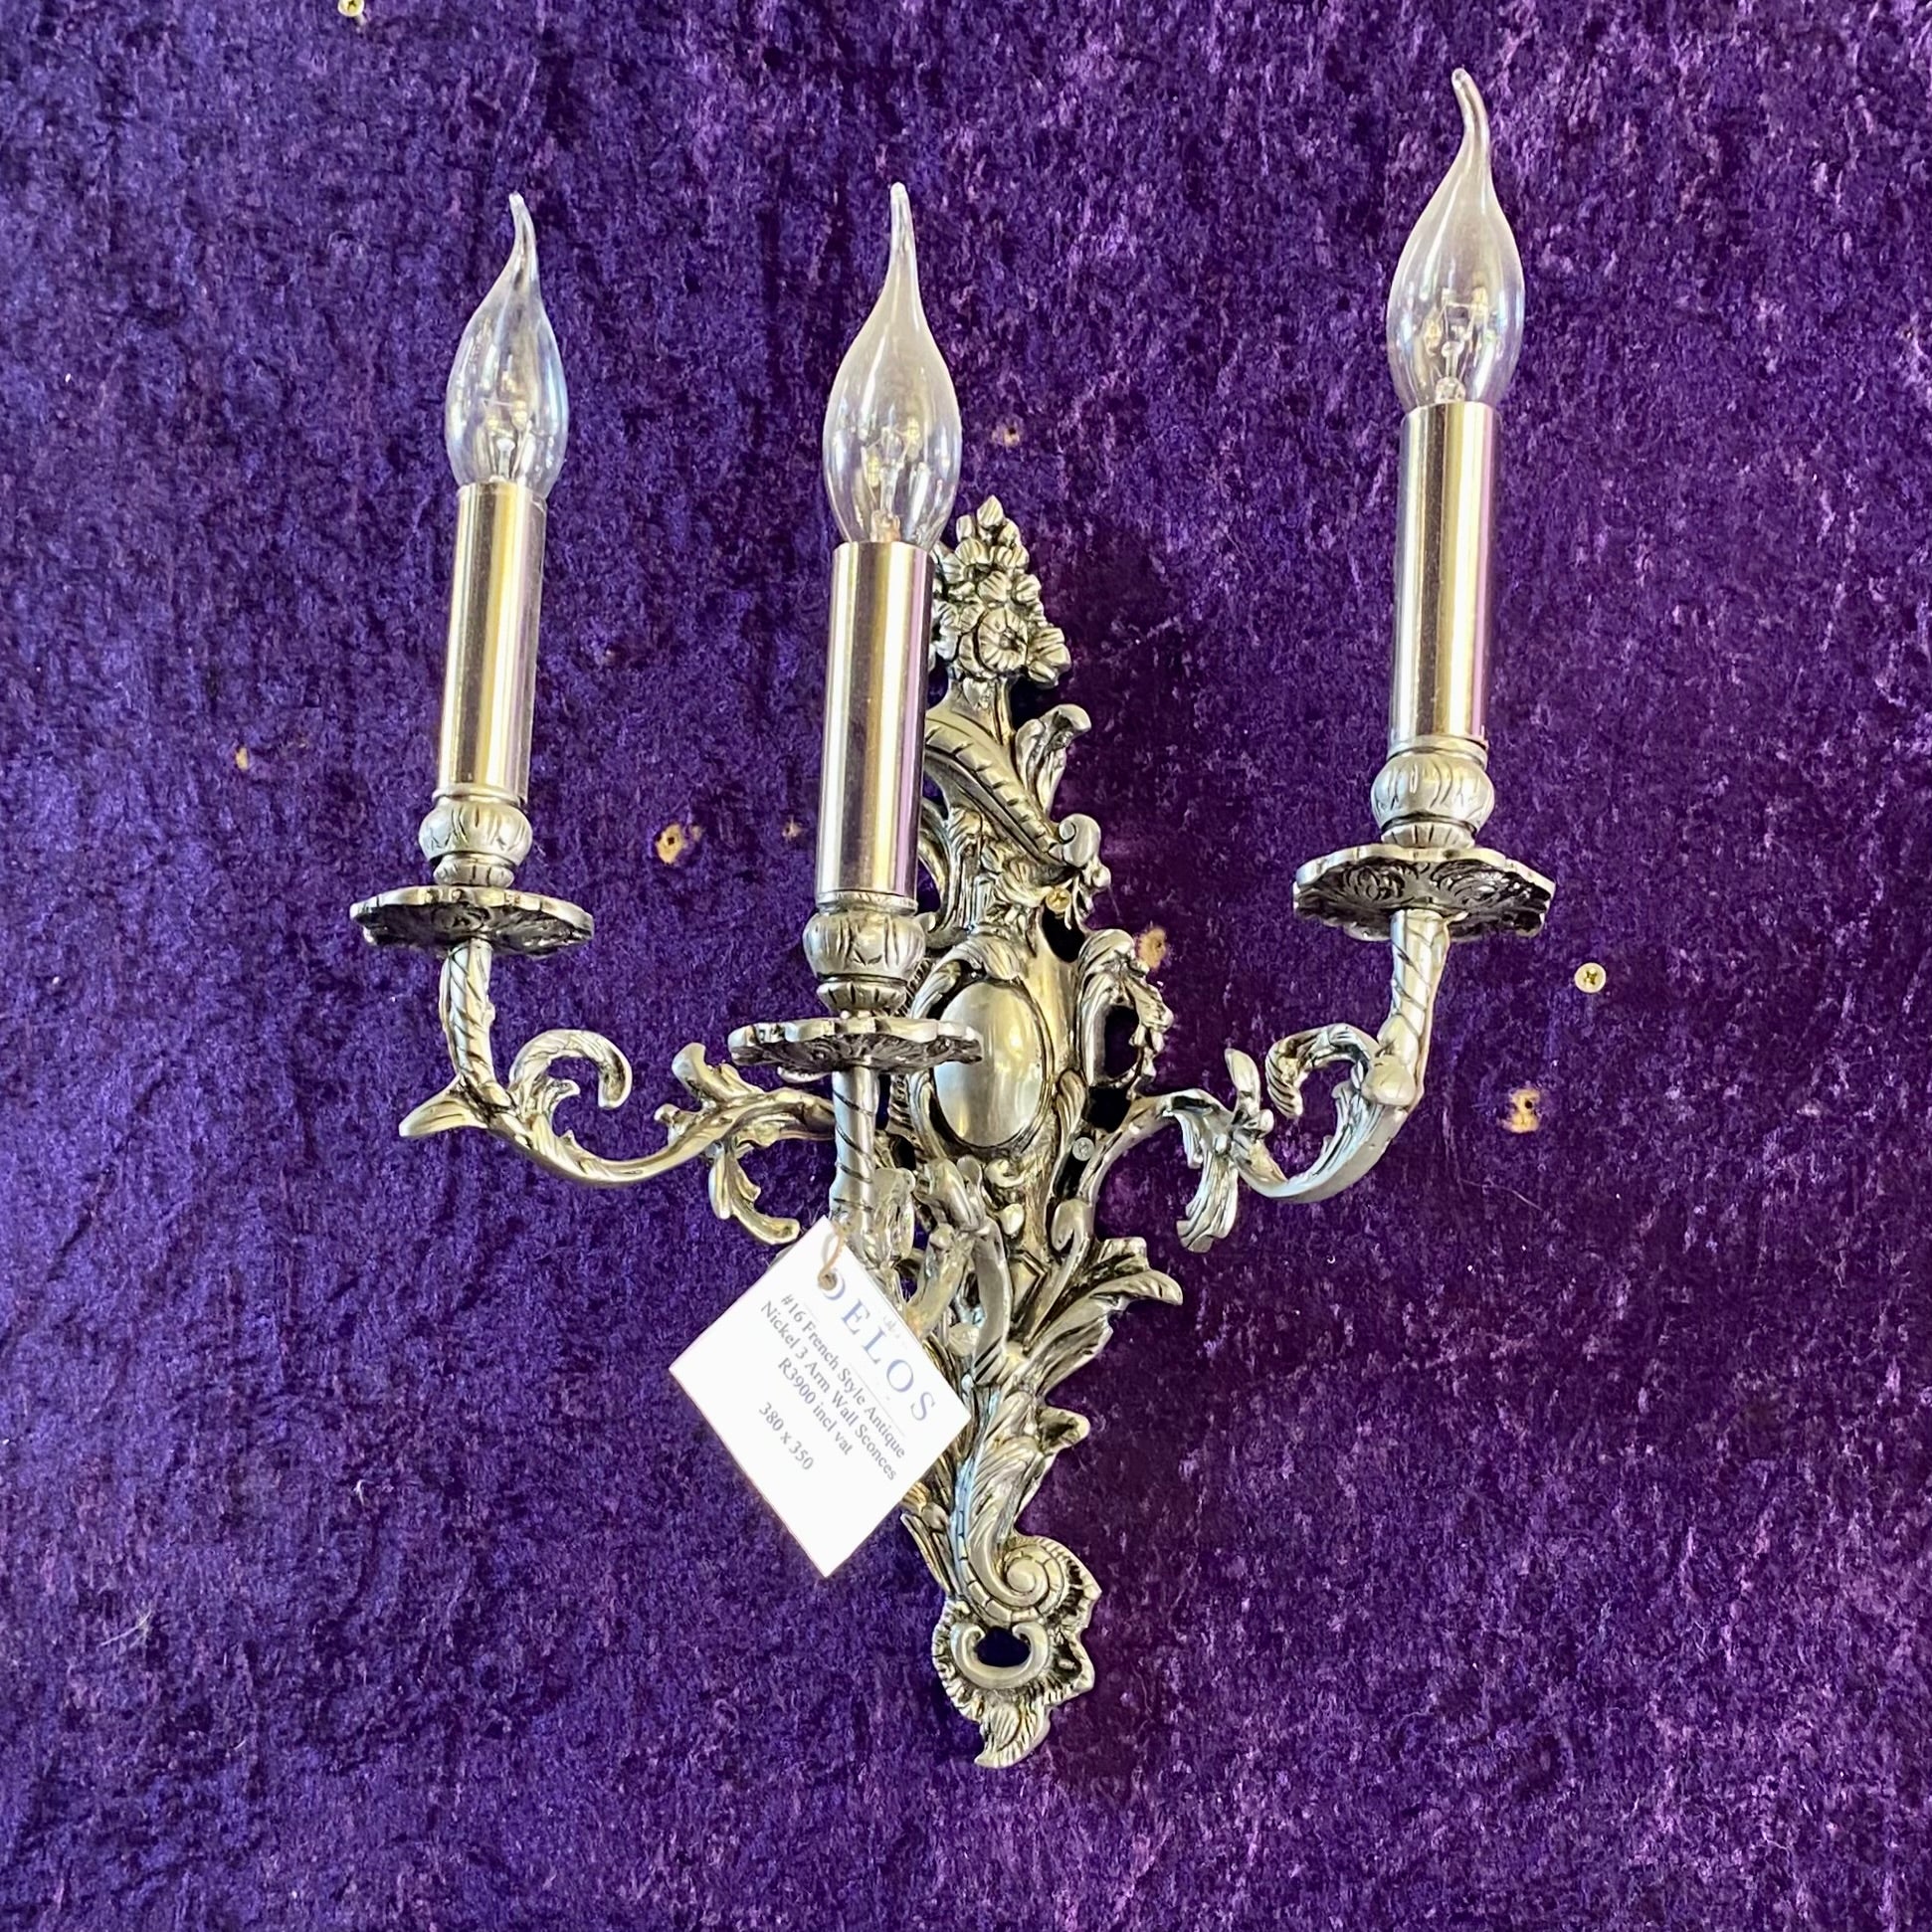 French Style Antique Nickel Plated Three Armed Wall Sconce